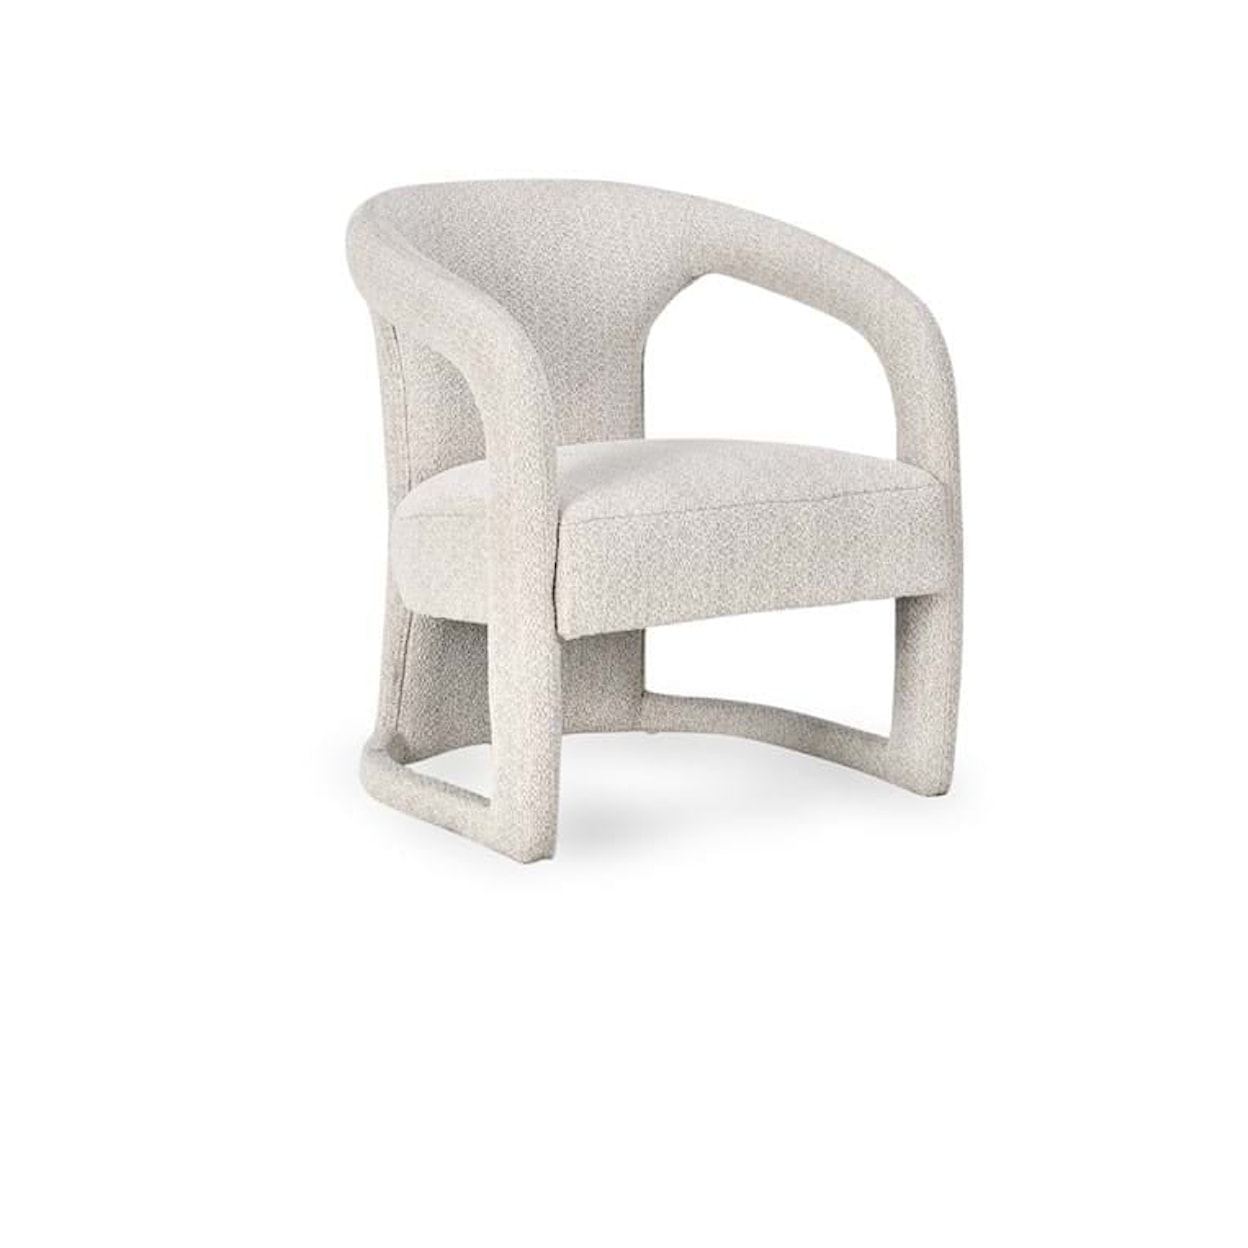 Classic Home Archie Archie Upholstered Accent Chair